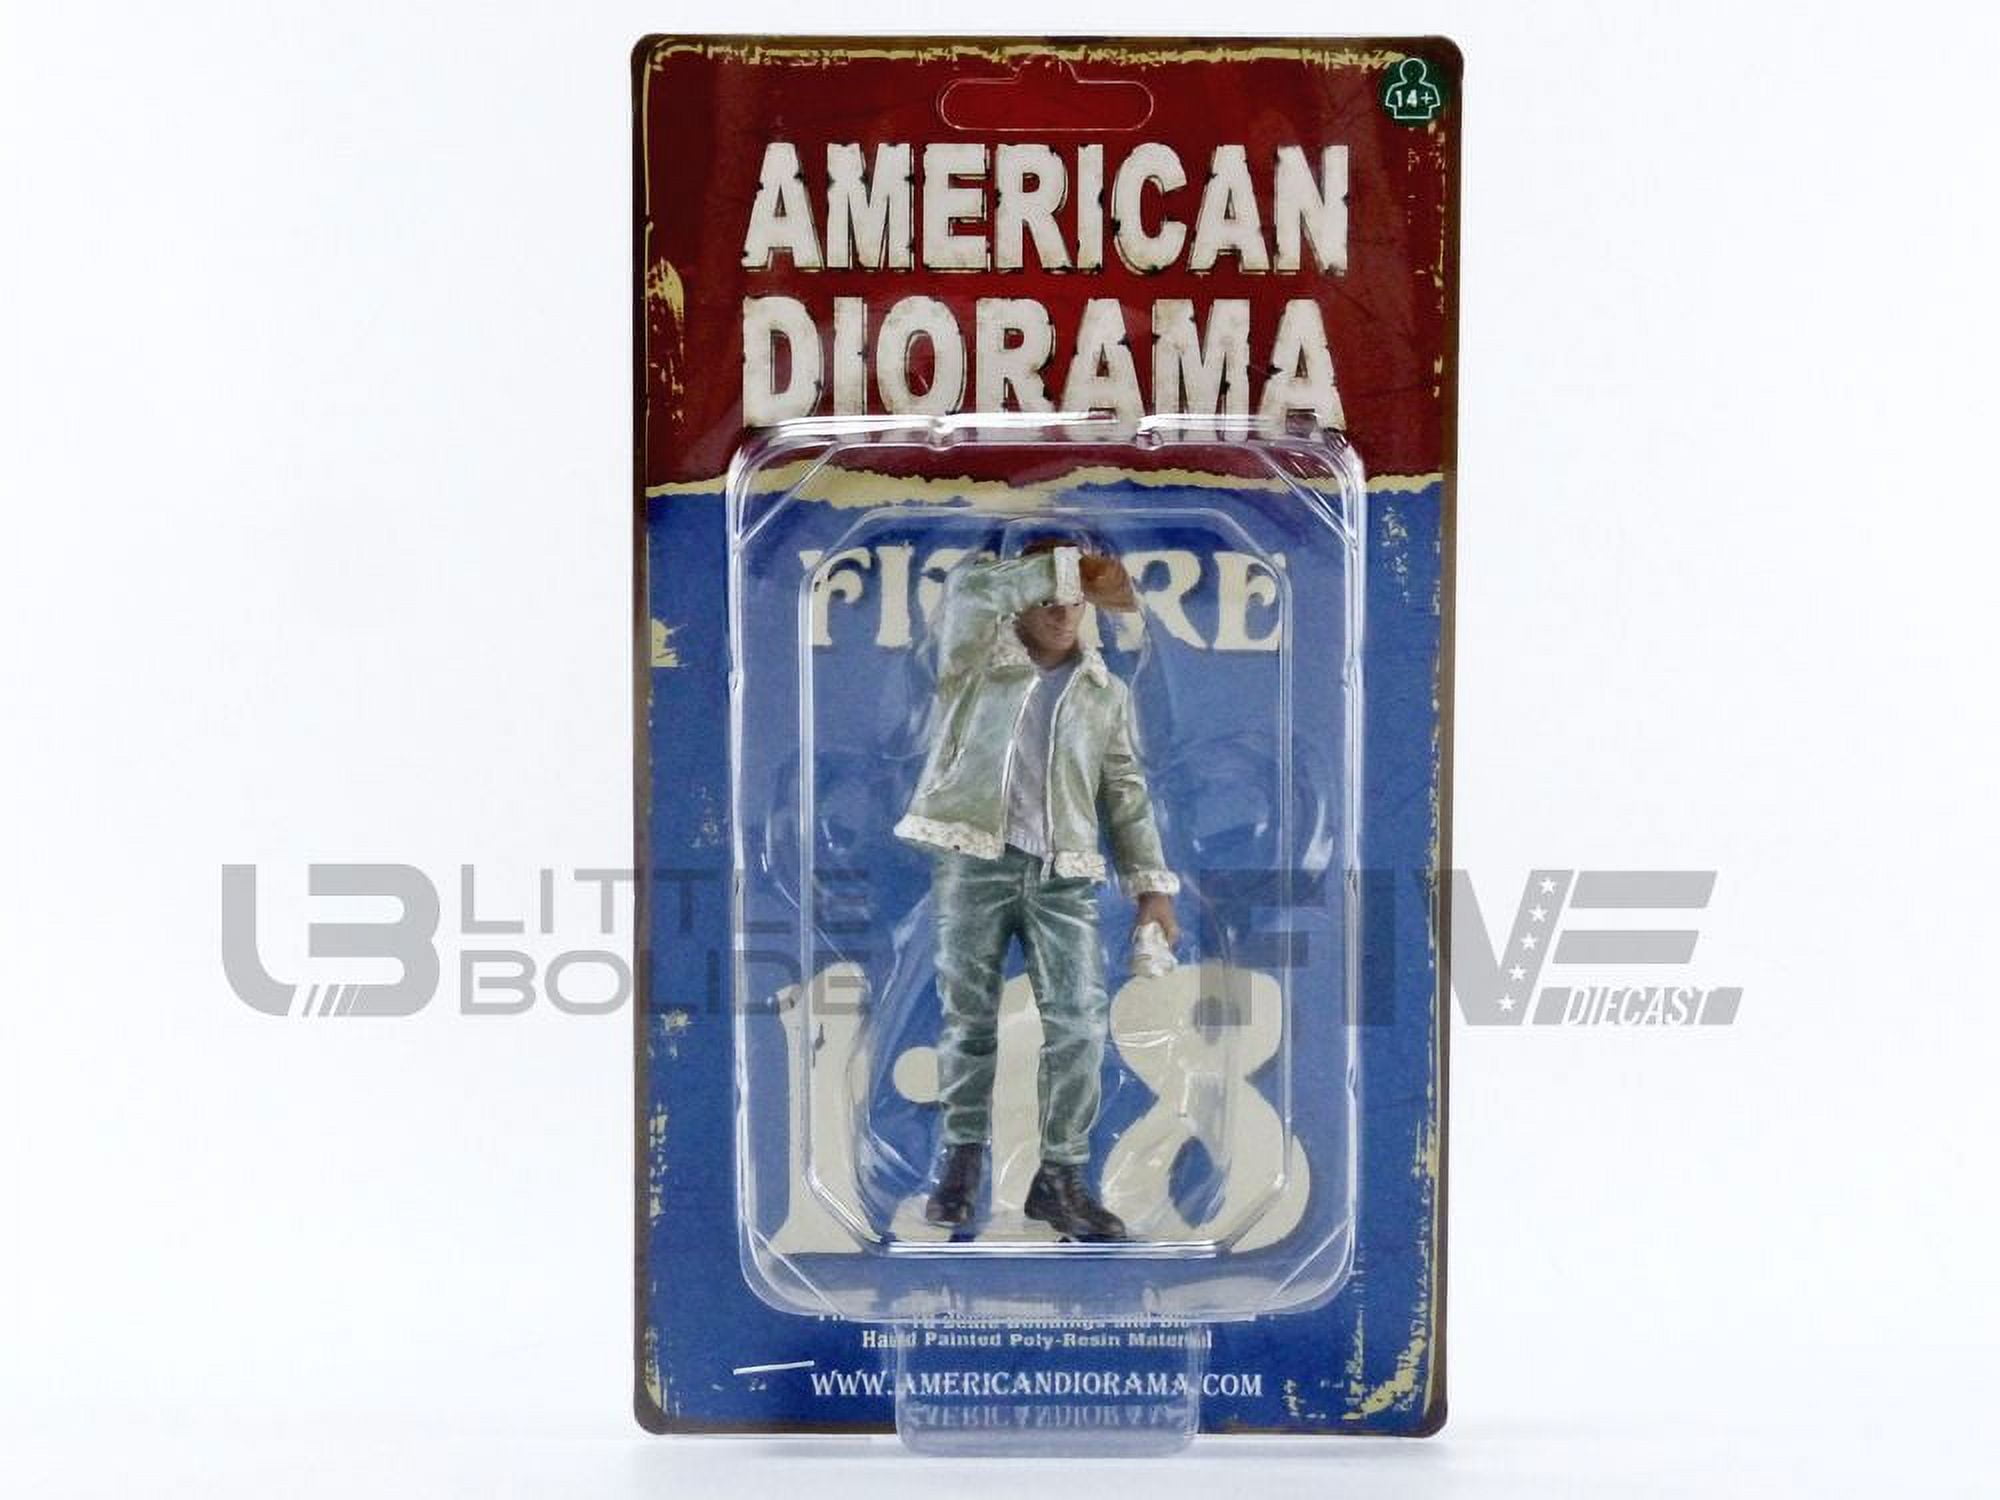 Picture of American Diorama 76262 Auto Mechanic Sweating Joe Figurine for 1 by 18 Scale Models